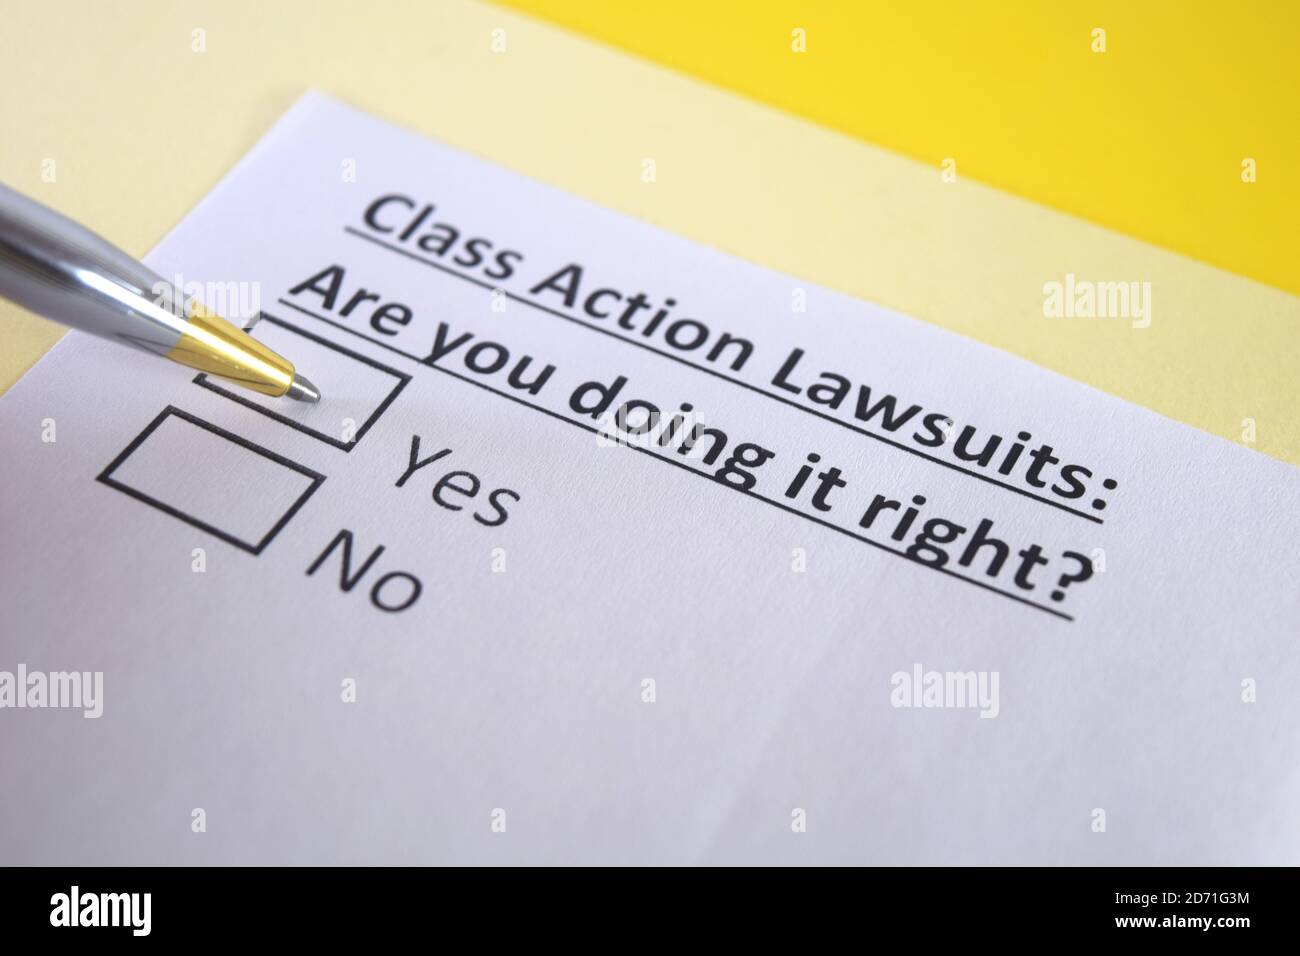 One person is answering question about class action lawsuits. Stock Photo